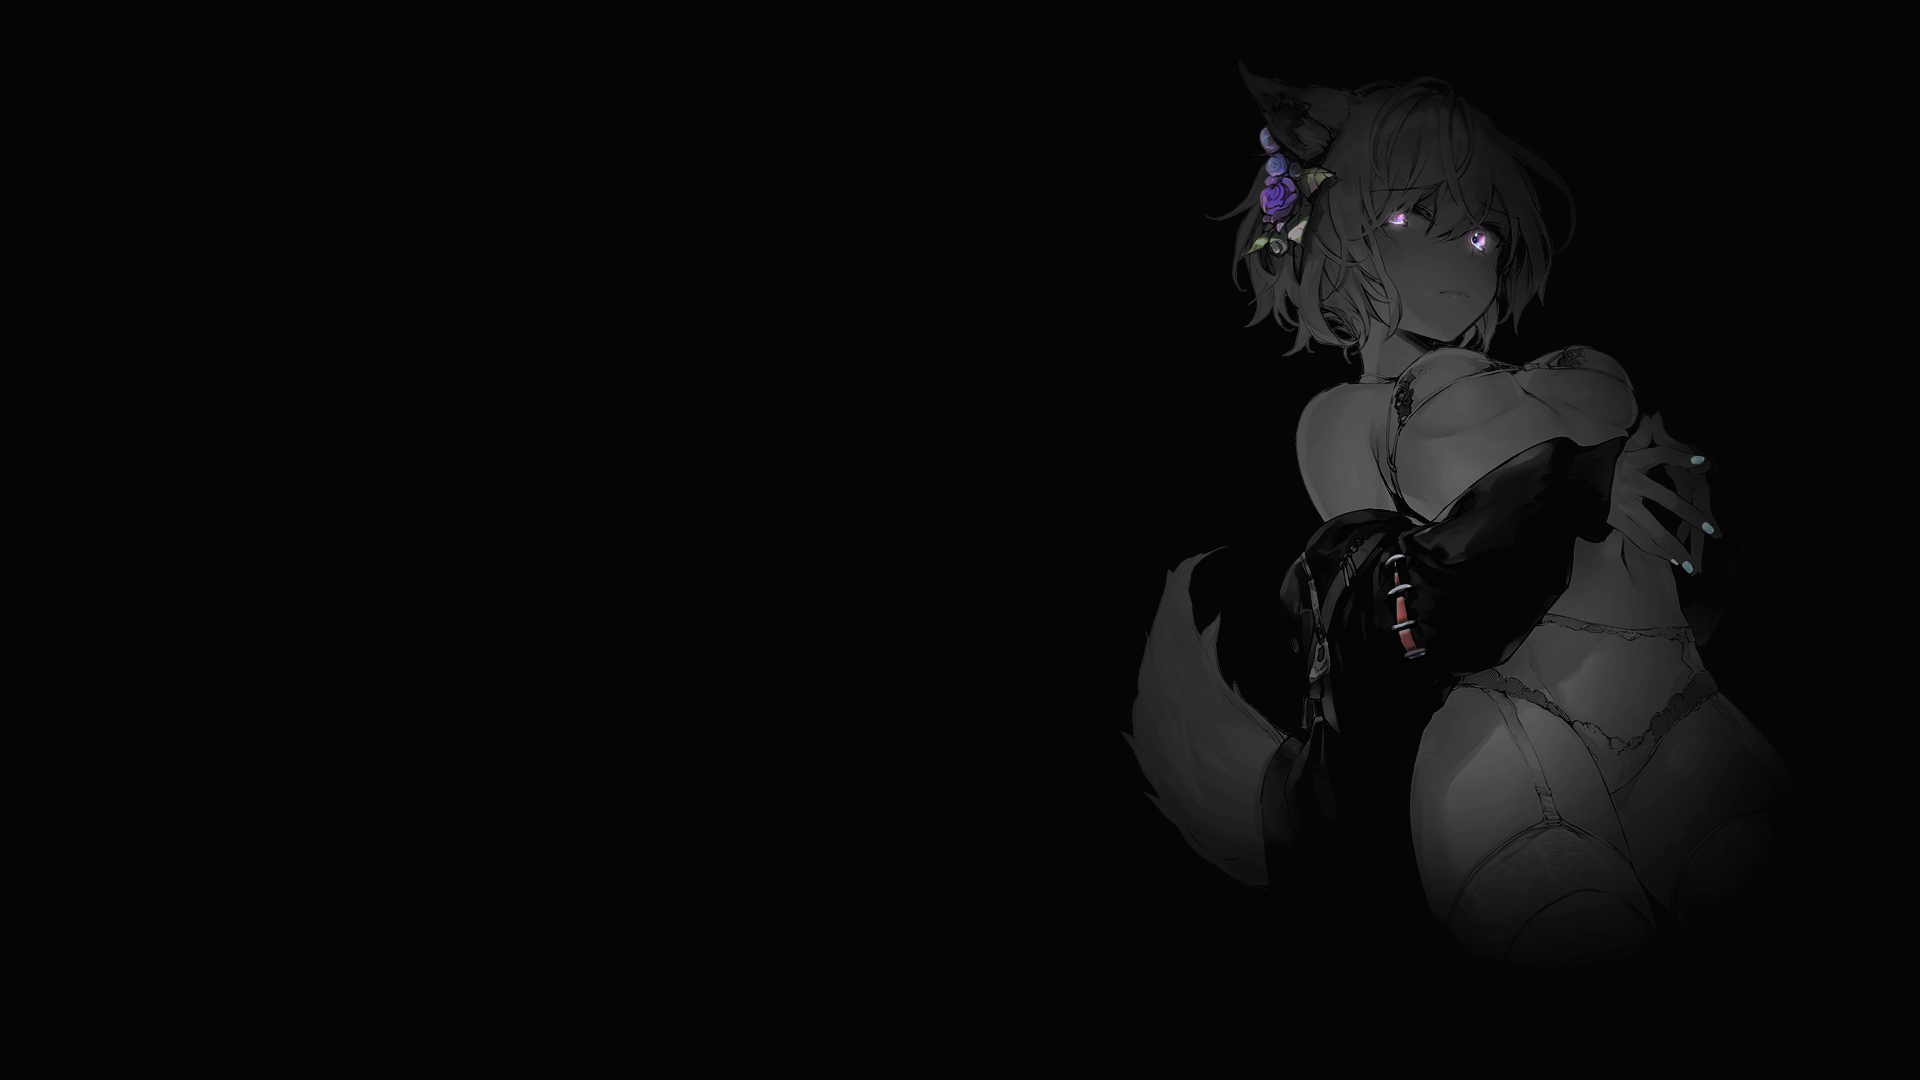 Anime 1920x1080 selective coloring simple background dark background black background anime girls fox girl fox ears fox tail stockings garter belt lingerie boobs underboob